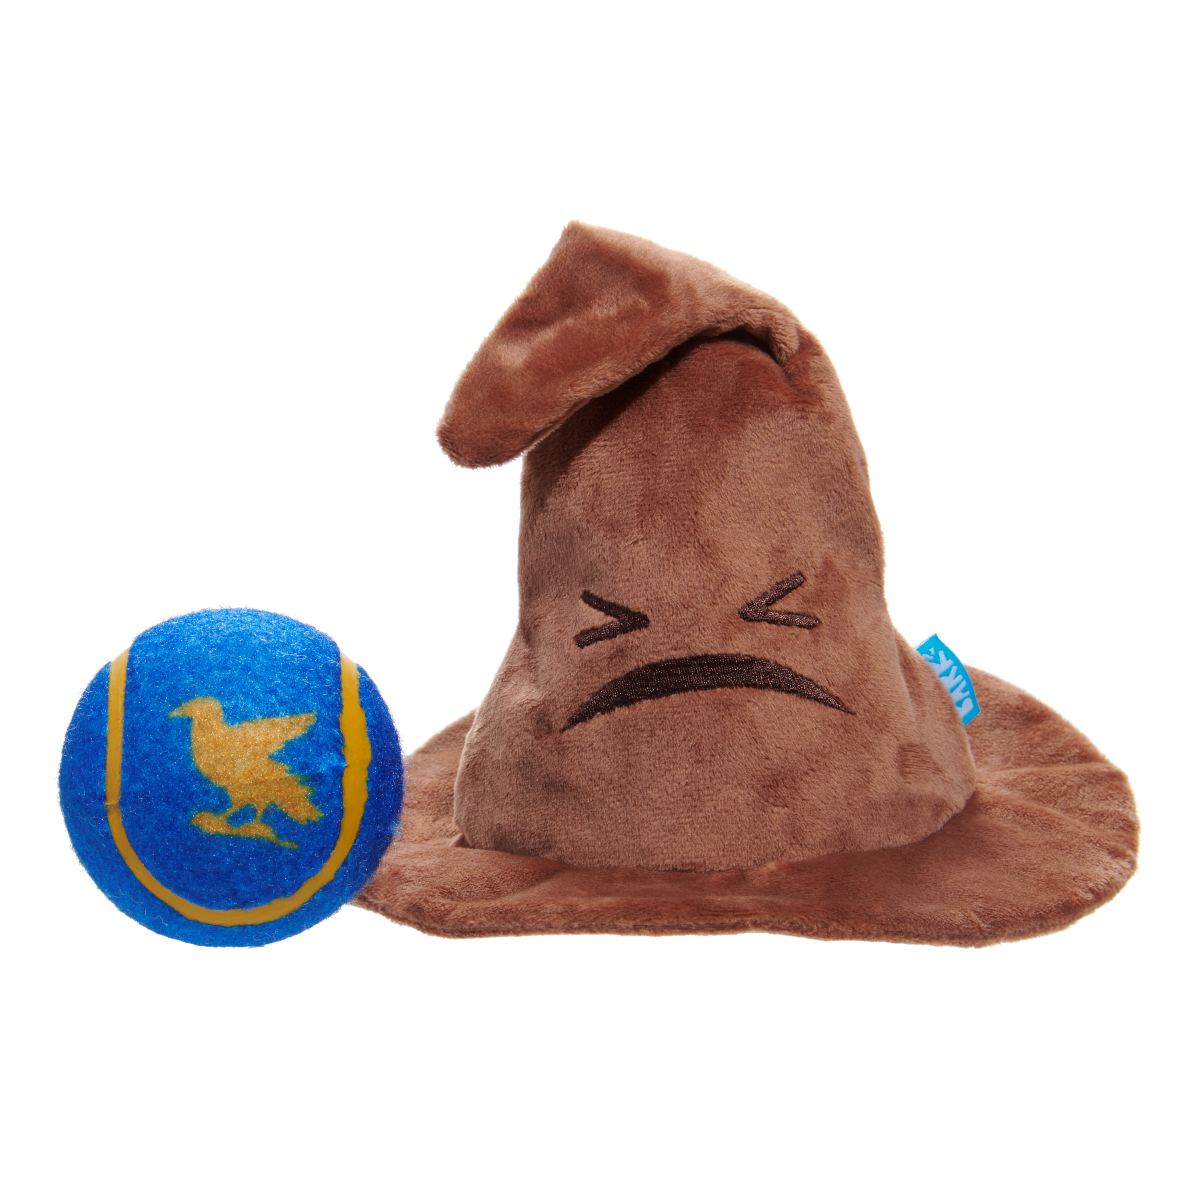 The Sorting Hat™